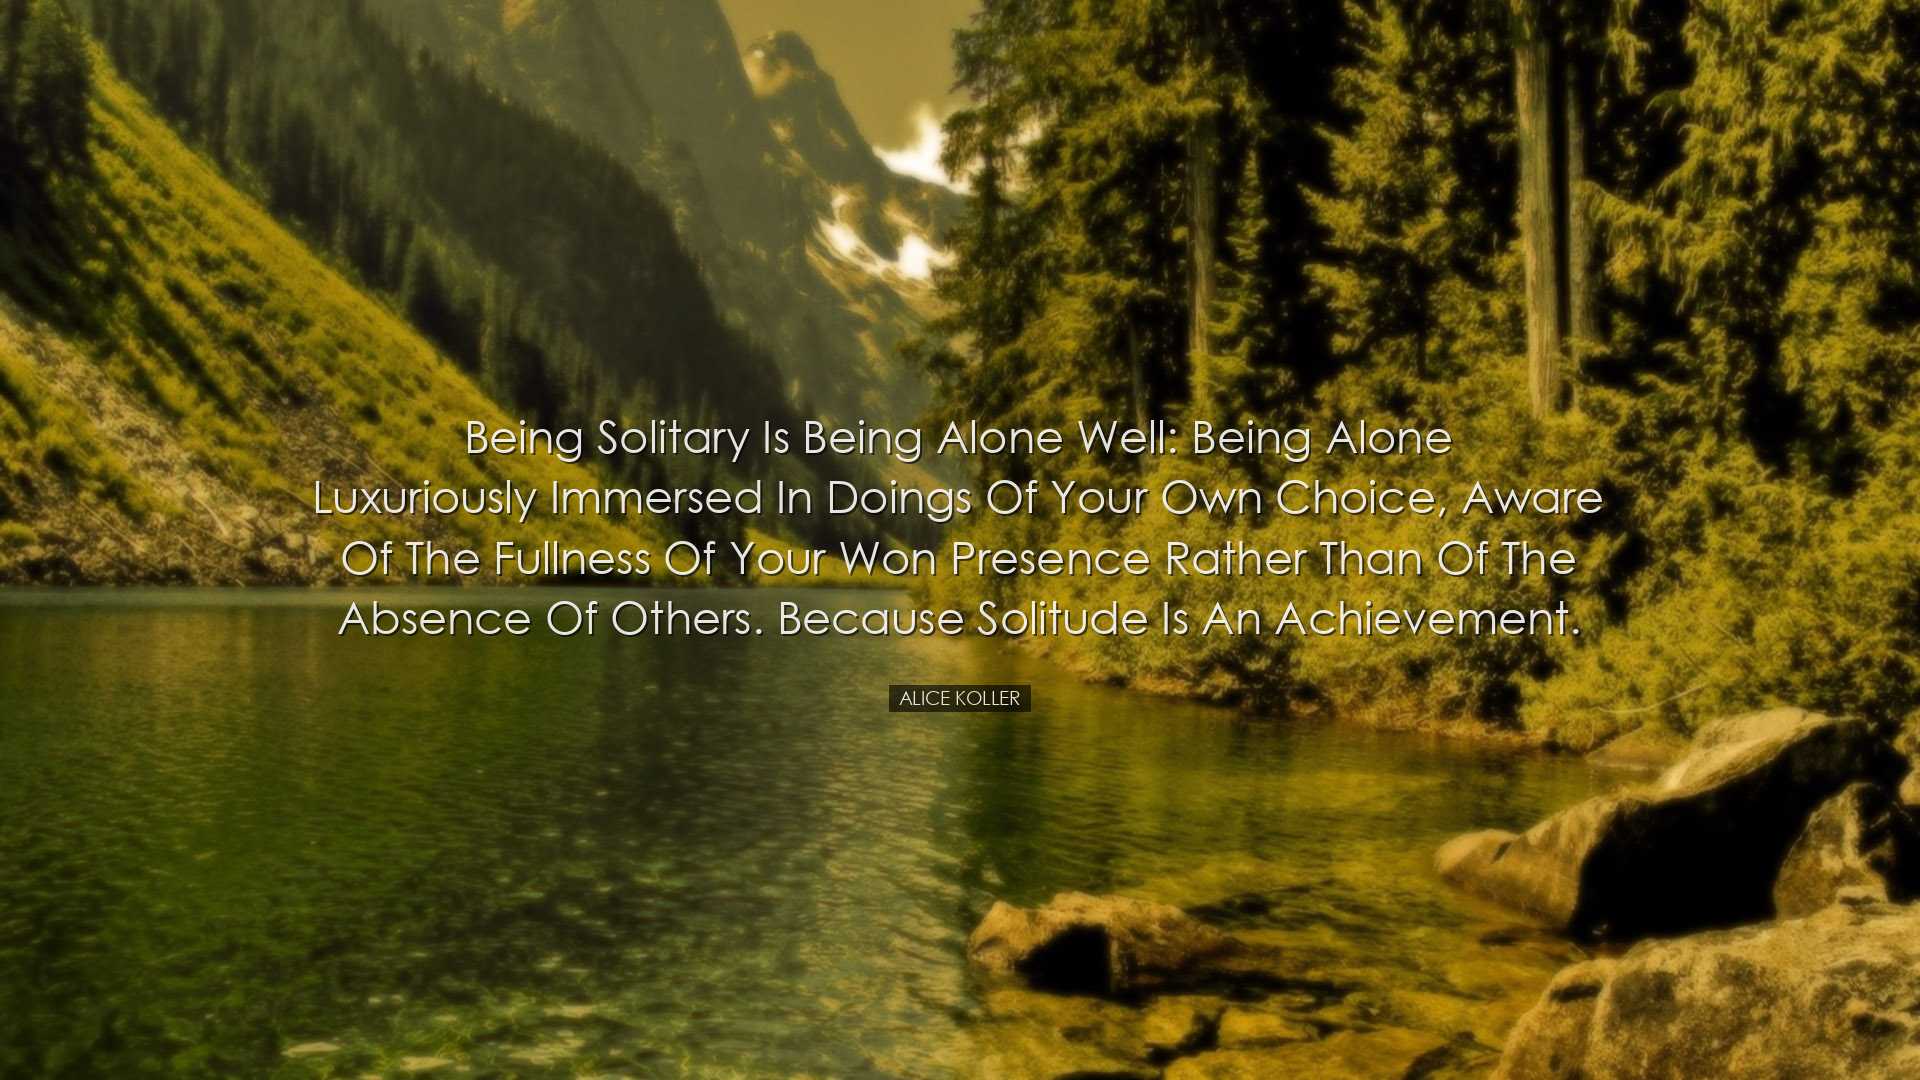 Being solitary is being alone well: being alone luxuriously immers